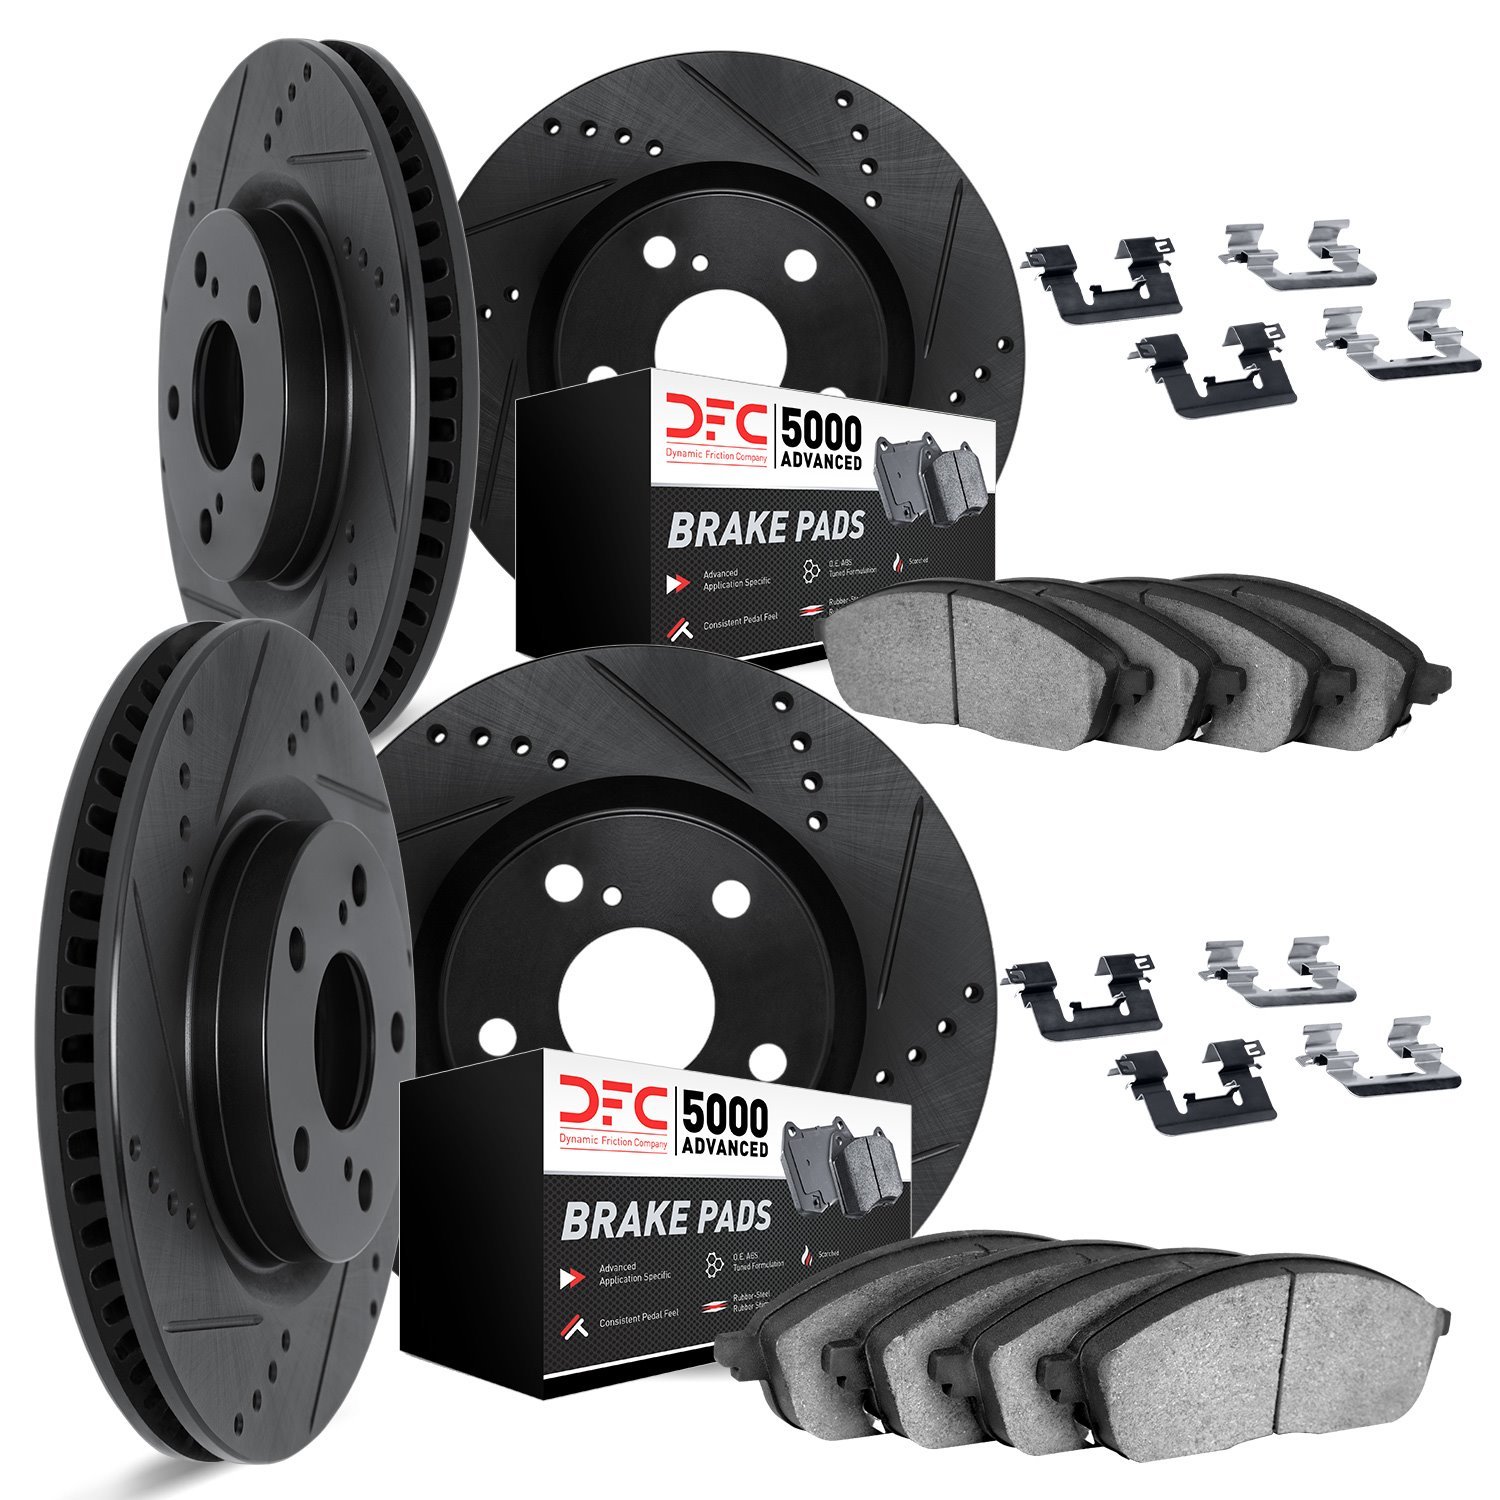 8514-31026 Drilled/Slotted Brake Rotors w/5000 Advanced Brake Pads Kit & Hardware [Black], 2011-2013 BMW, Position: Front and Re